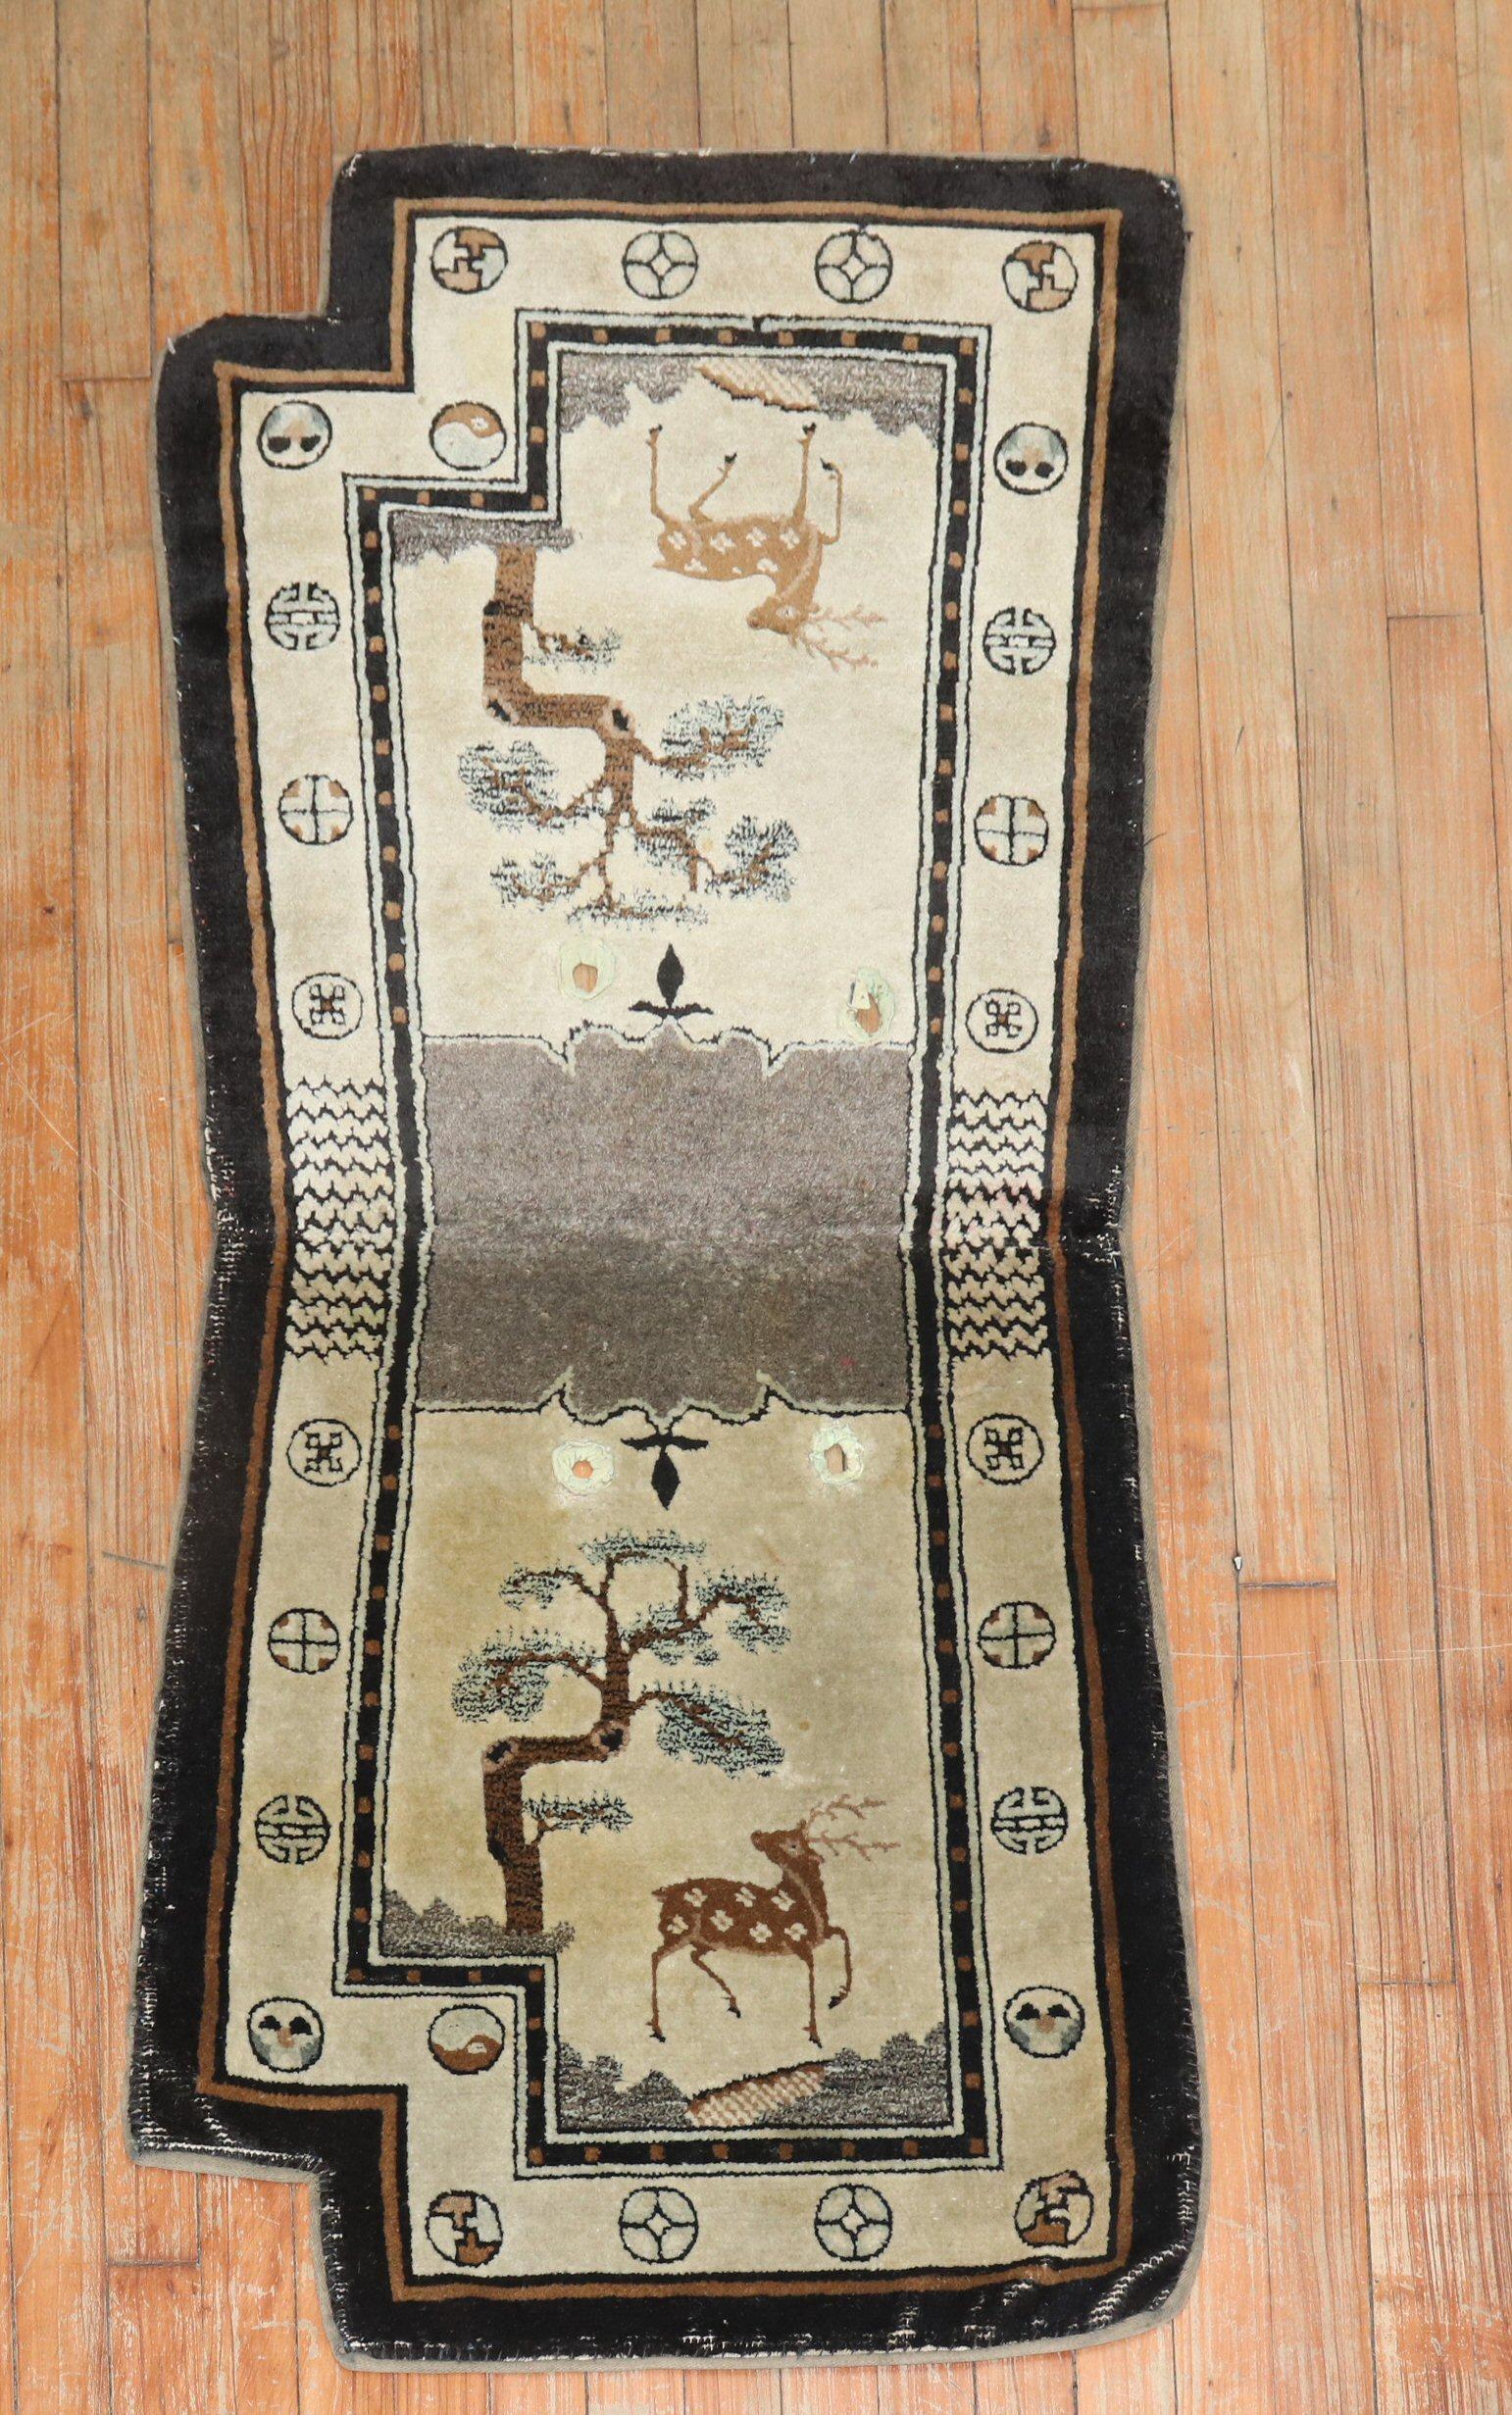 An early 20th-century colorful Tibetan horse cover textile rug.

Measures: 2'1'' x 4'7''.